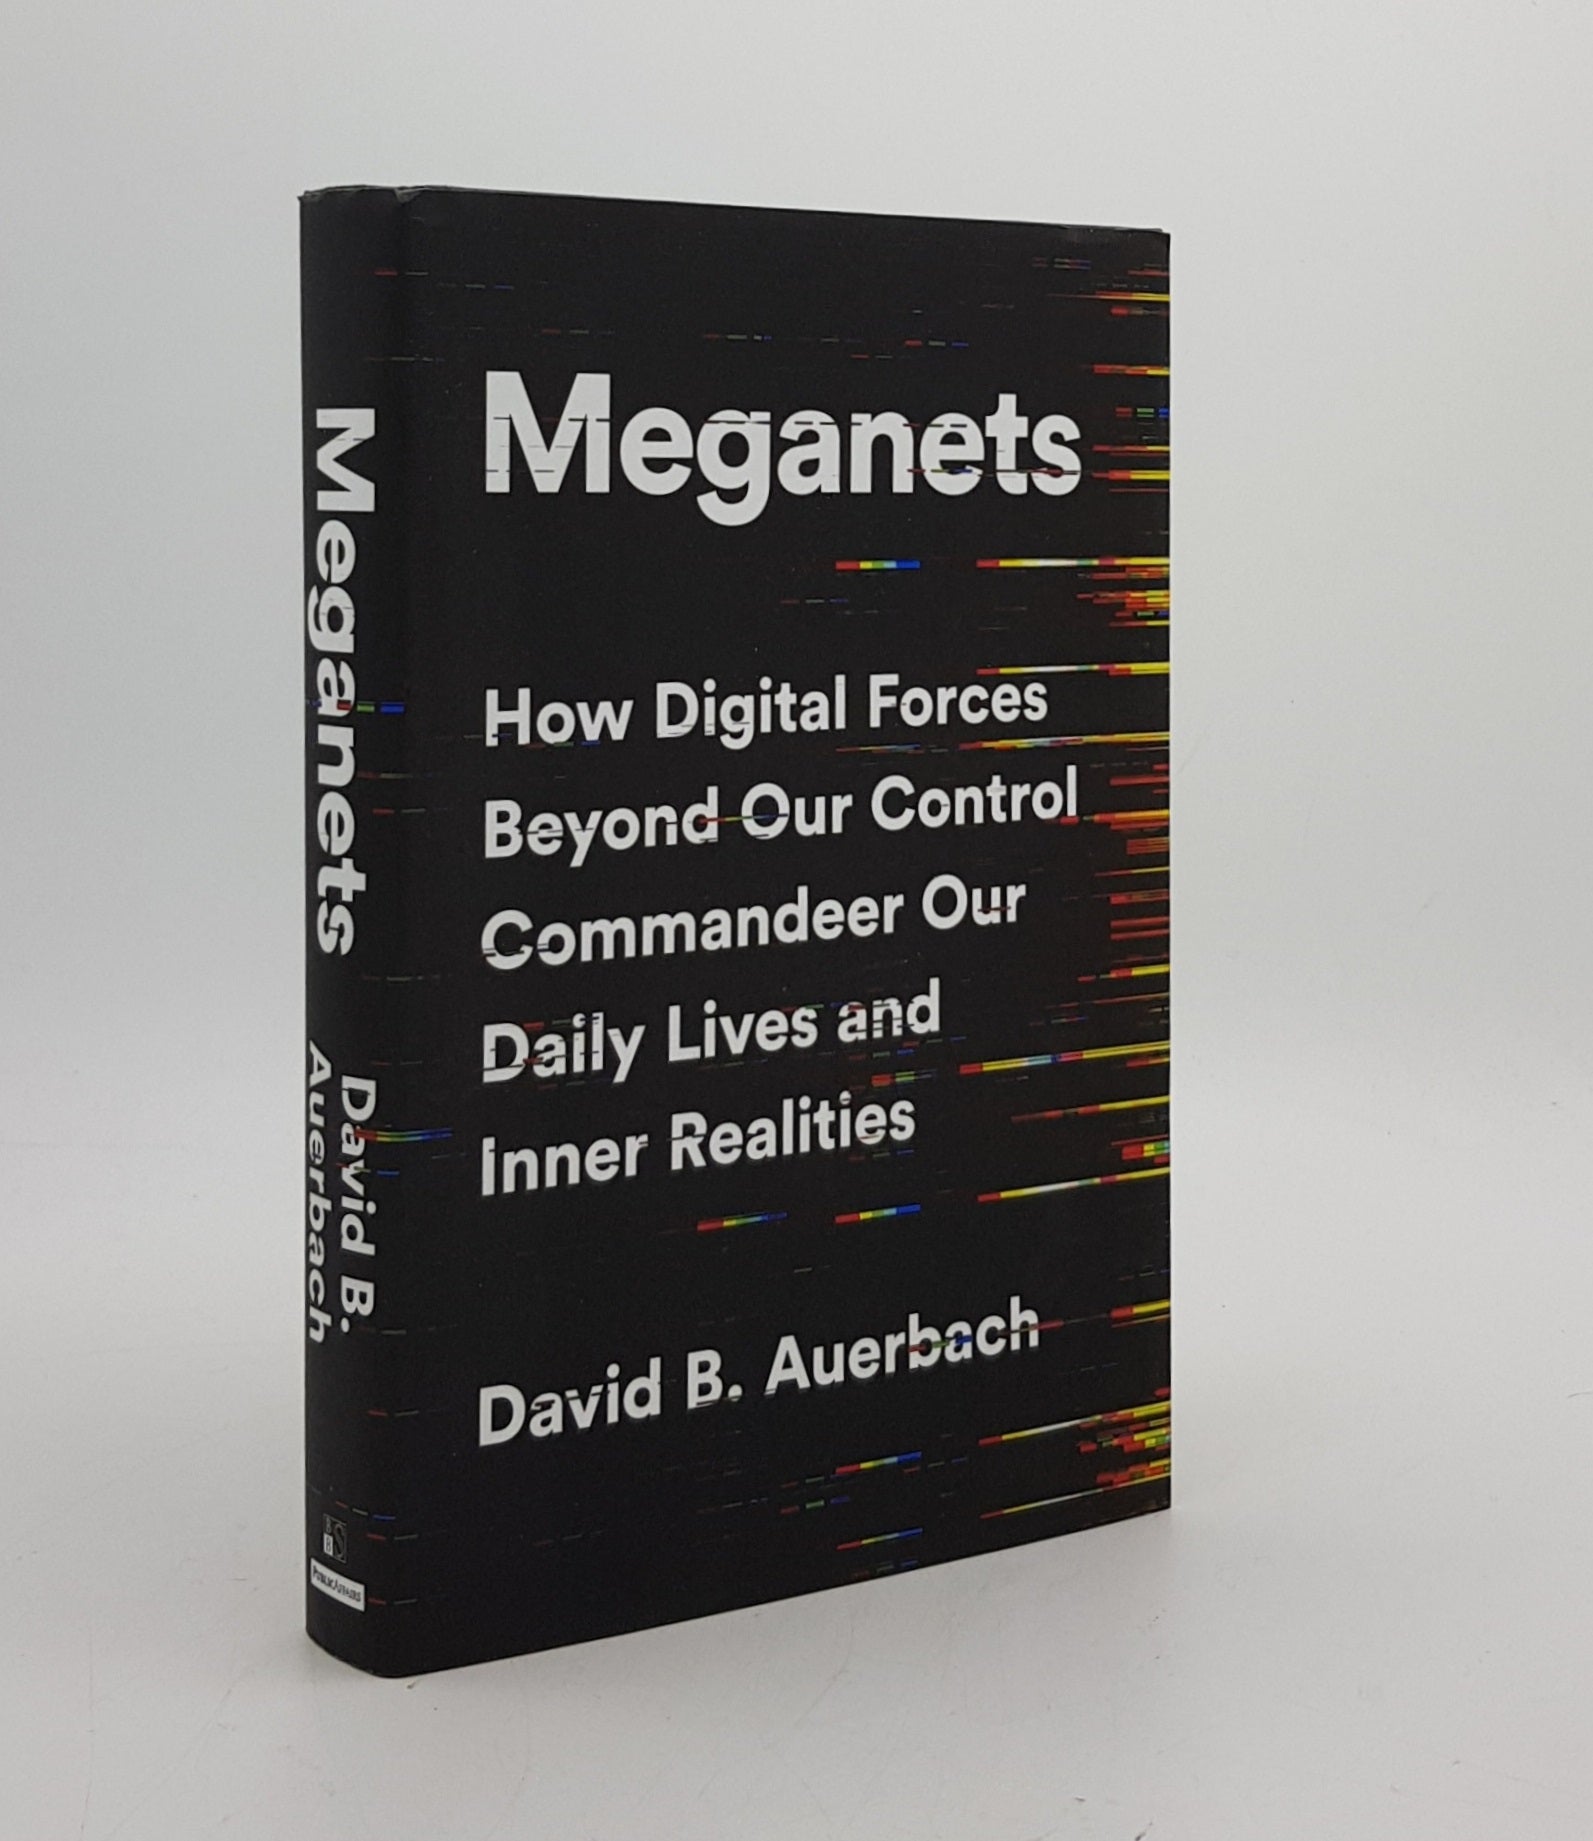 AUERBACH David B. - Meganets How Digital Forces Beyond Our Control Commandeer Our Daily Lives and Inner Realities